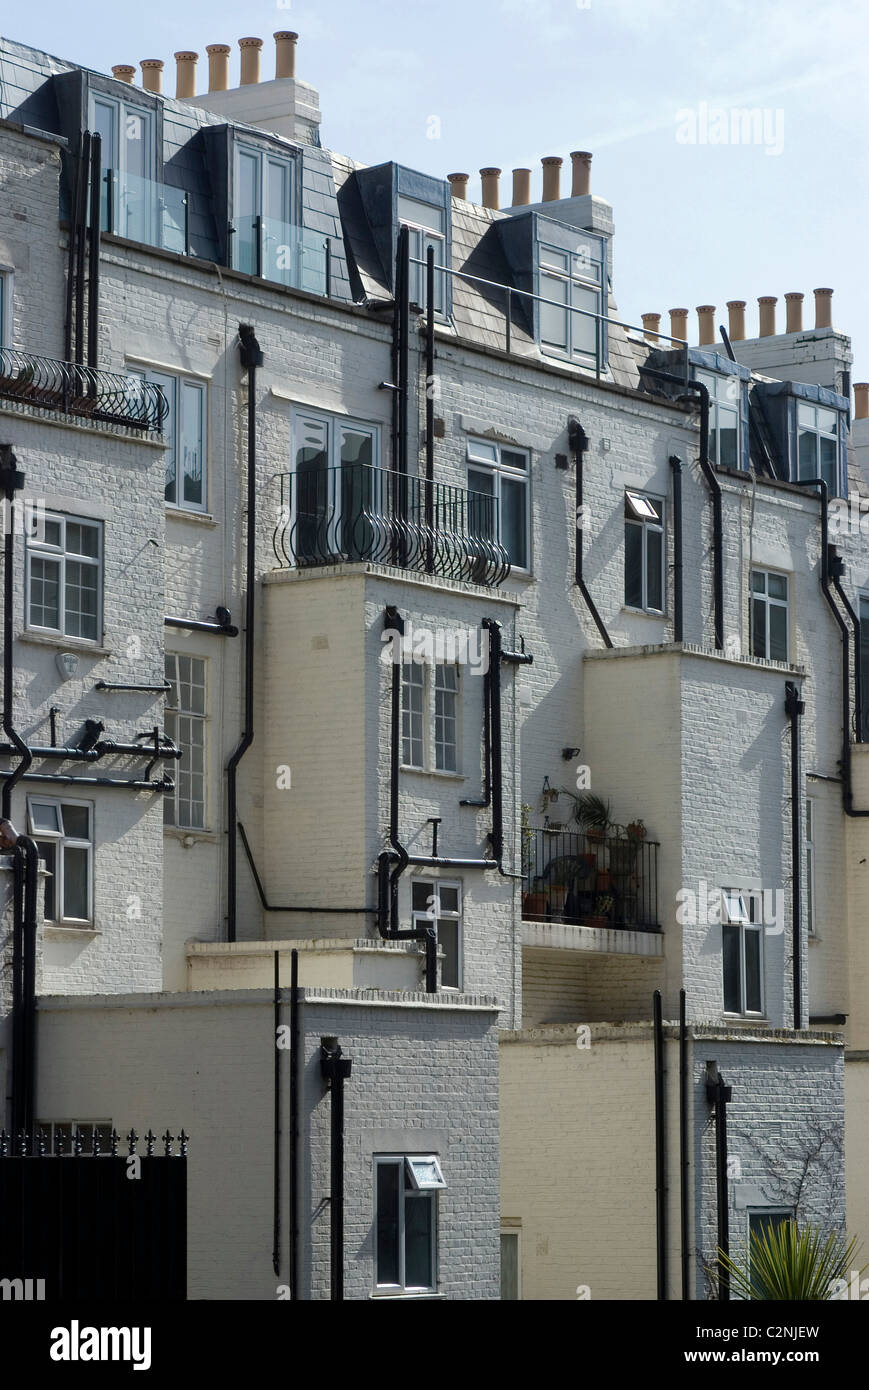 Back of terrace houses and chimneys, Wells Rise, near Primrose Hill, London, NW1, England Stock Photo